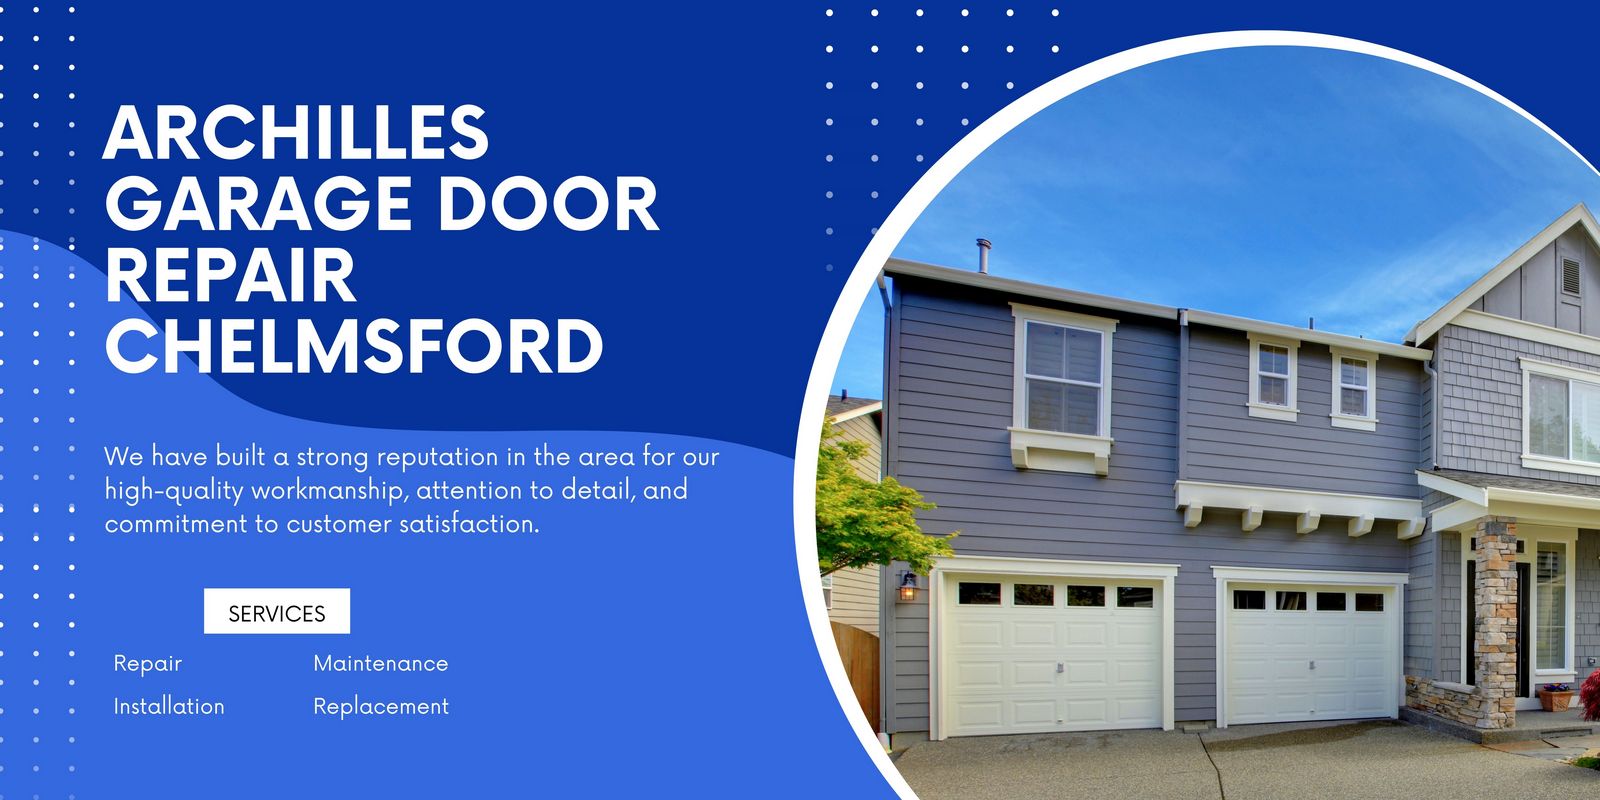 Archilles Garage Door Repair Chelmsford MA. We offer exceptional workmanship and tailored solutions to meet your unique needs. Get in touch now for high-quality repair services.